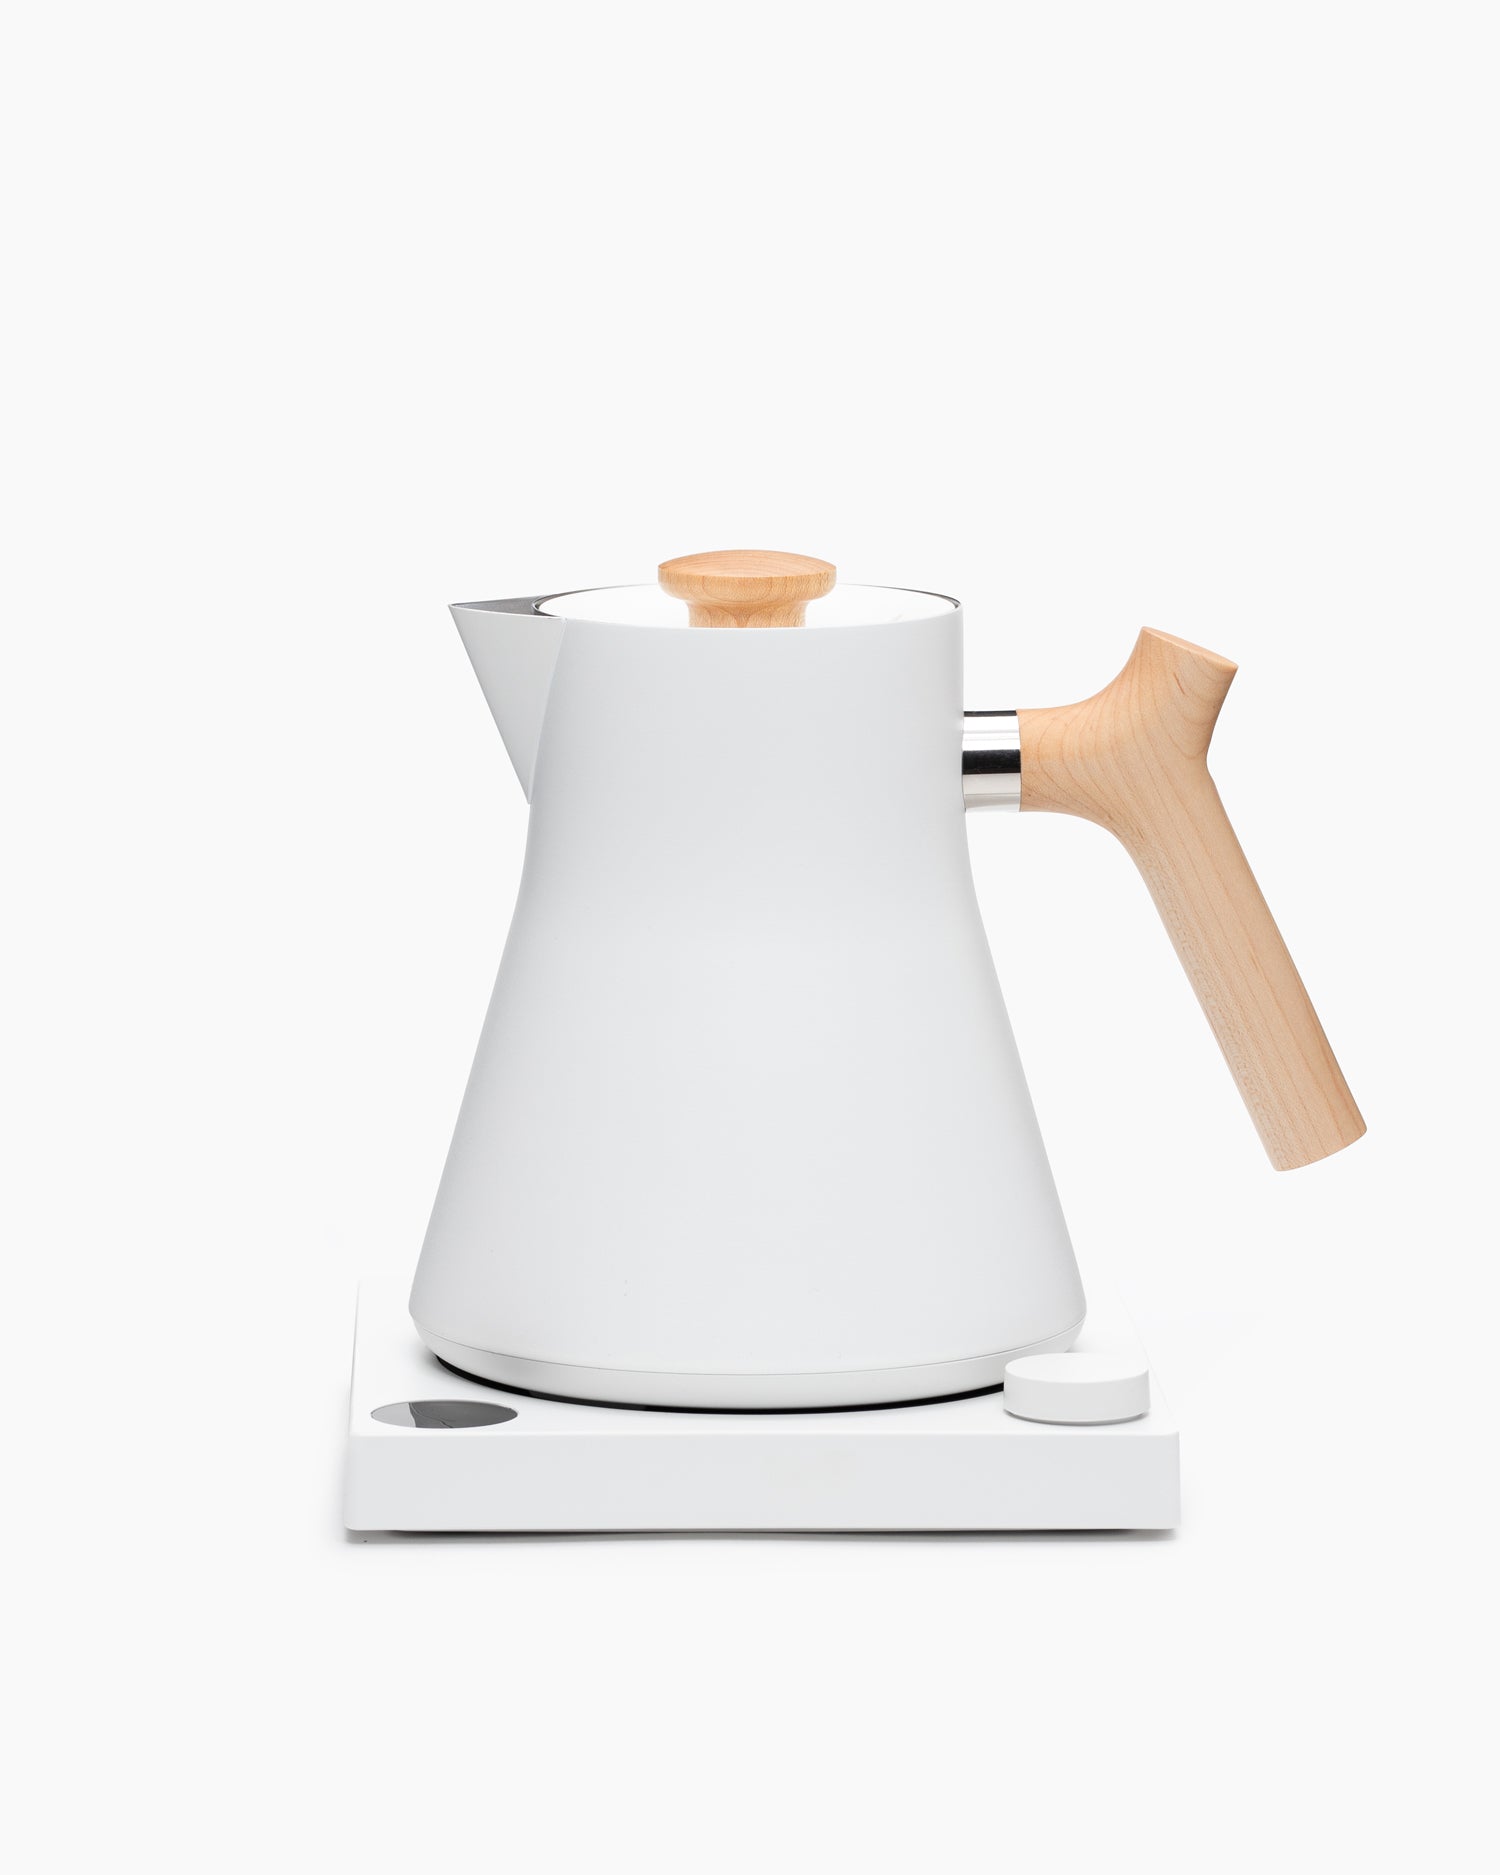 Fellow Stagg EKG Matte White Electric Kettle with Maple Handle + Reviews